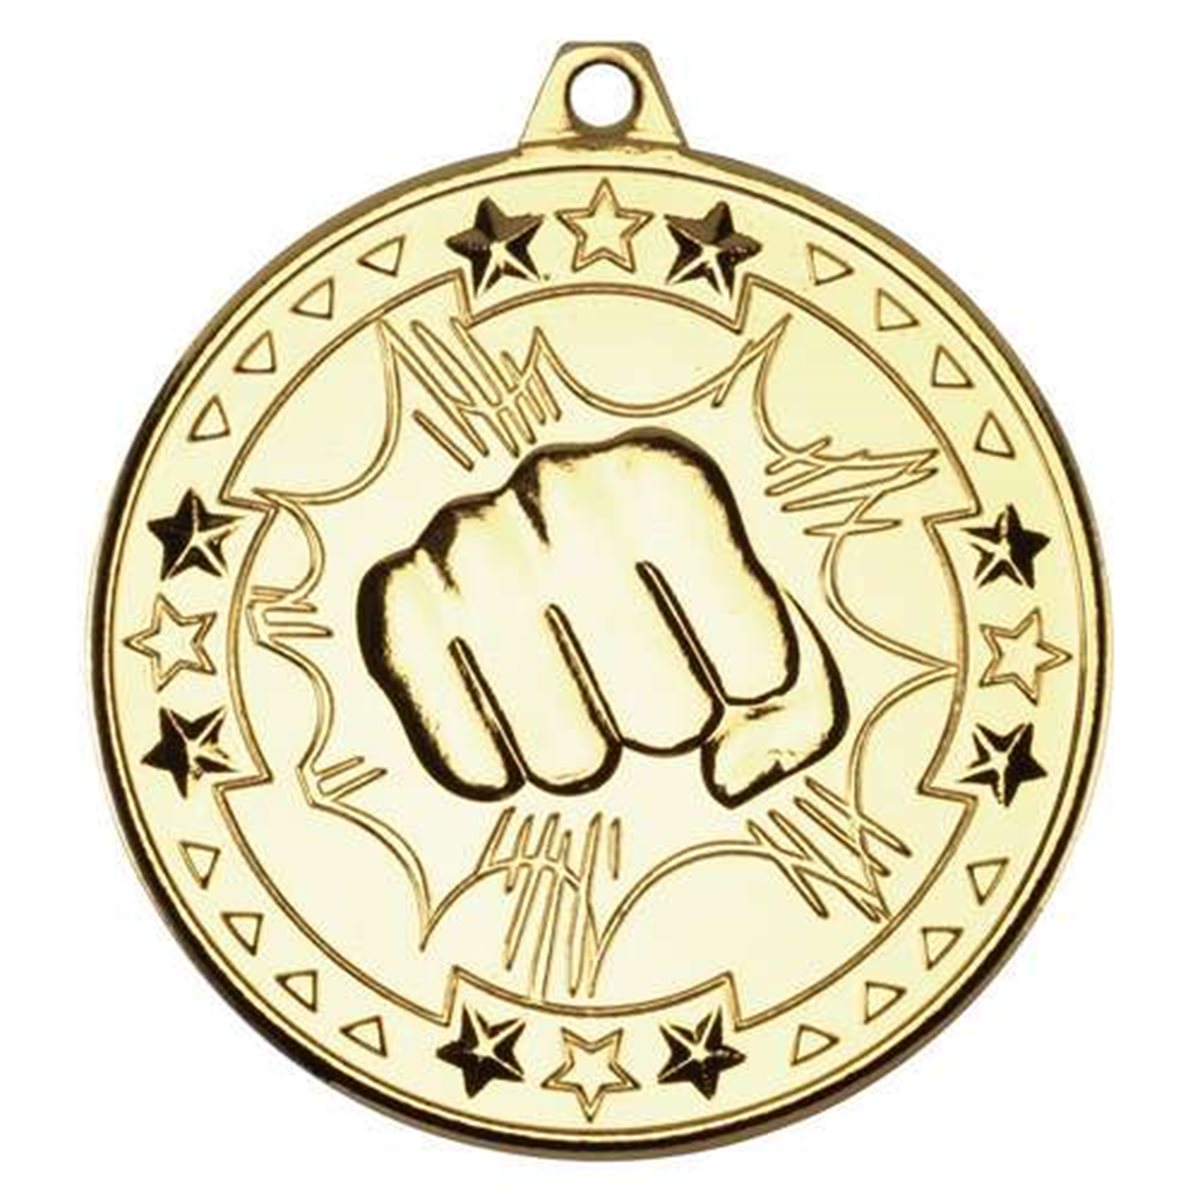 Martial Arts 50mm Medal in Gold, Silver & Bronze M74